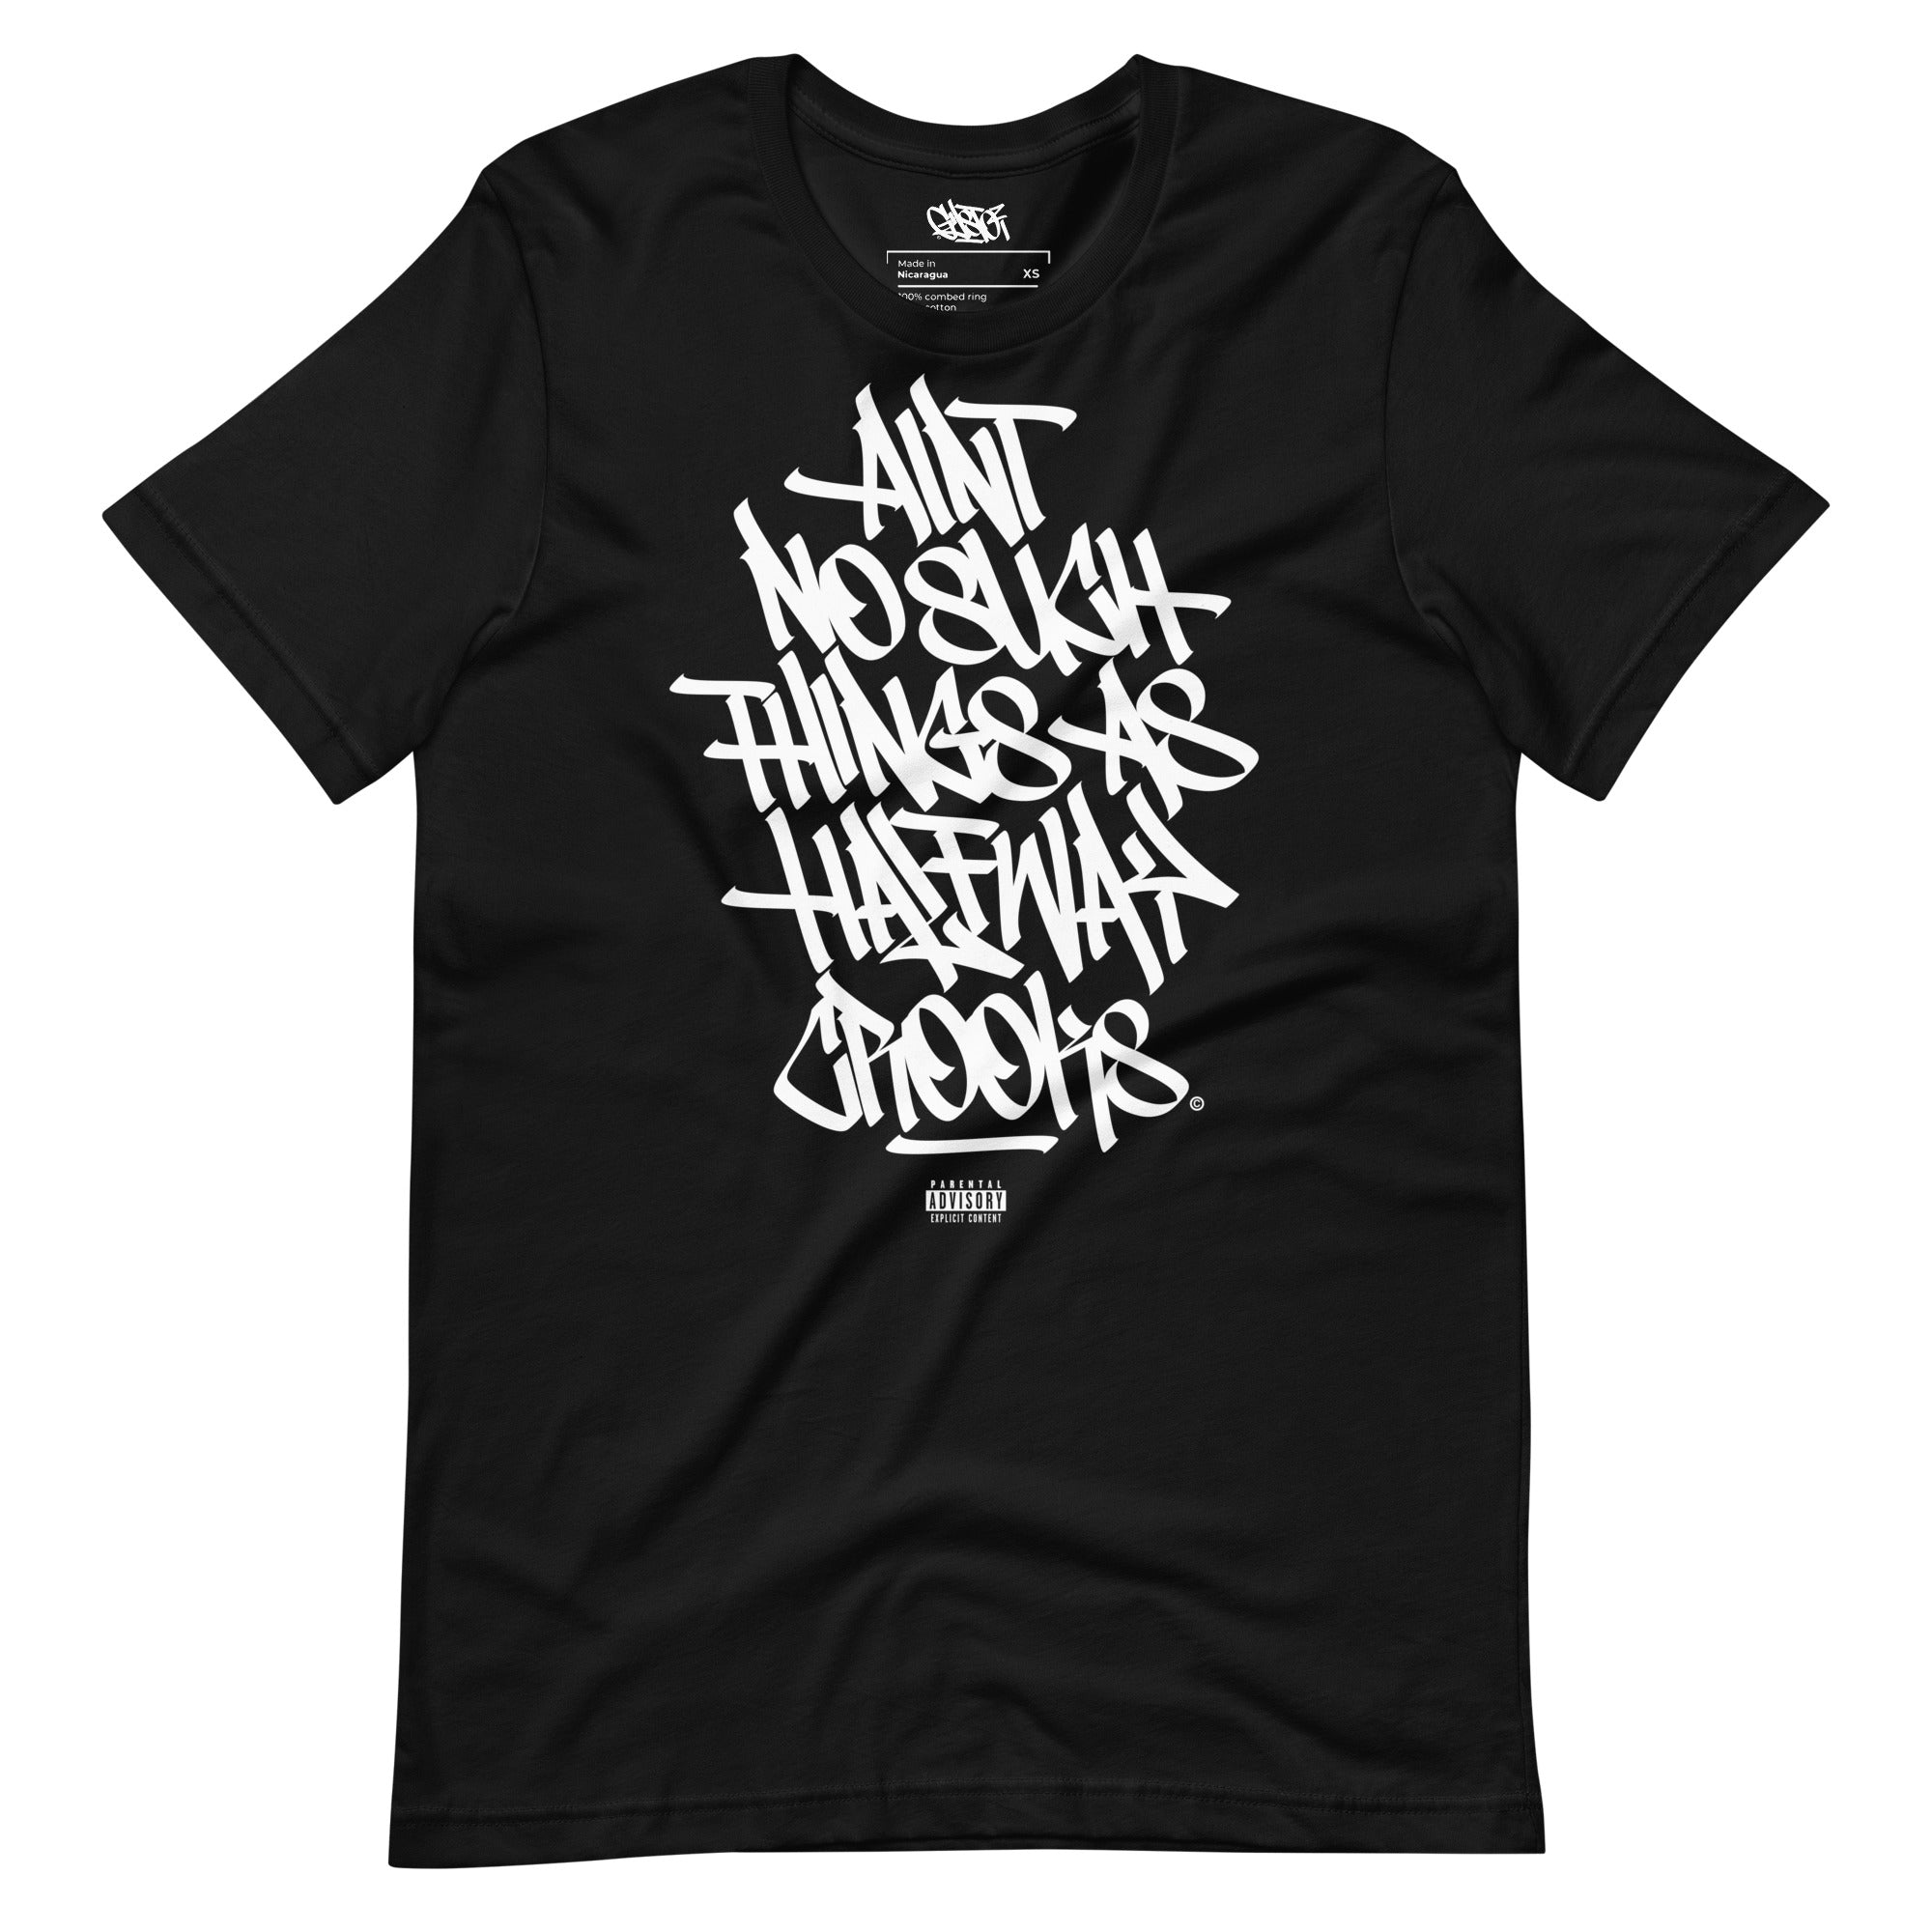 Ain't No Such Things As Halfway Crooks - Unisex T-Shirt